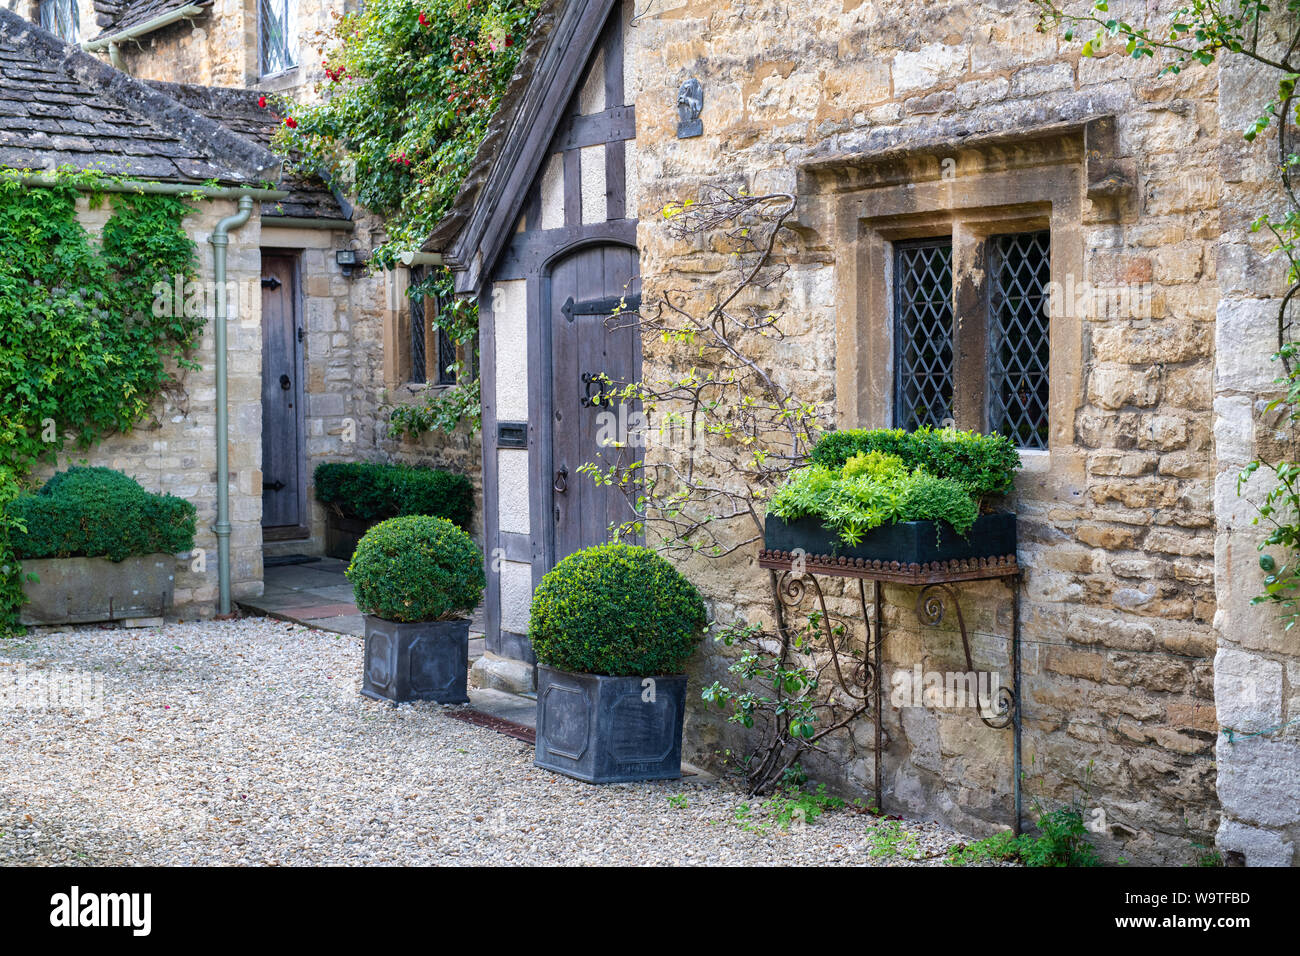 Stone and timber framed house house in sheep street. Burford, Cotswolds, Oxfordshire, England Stock Photo